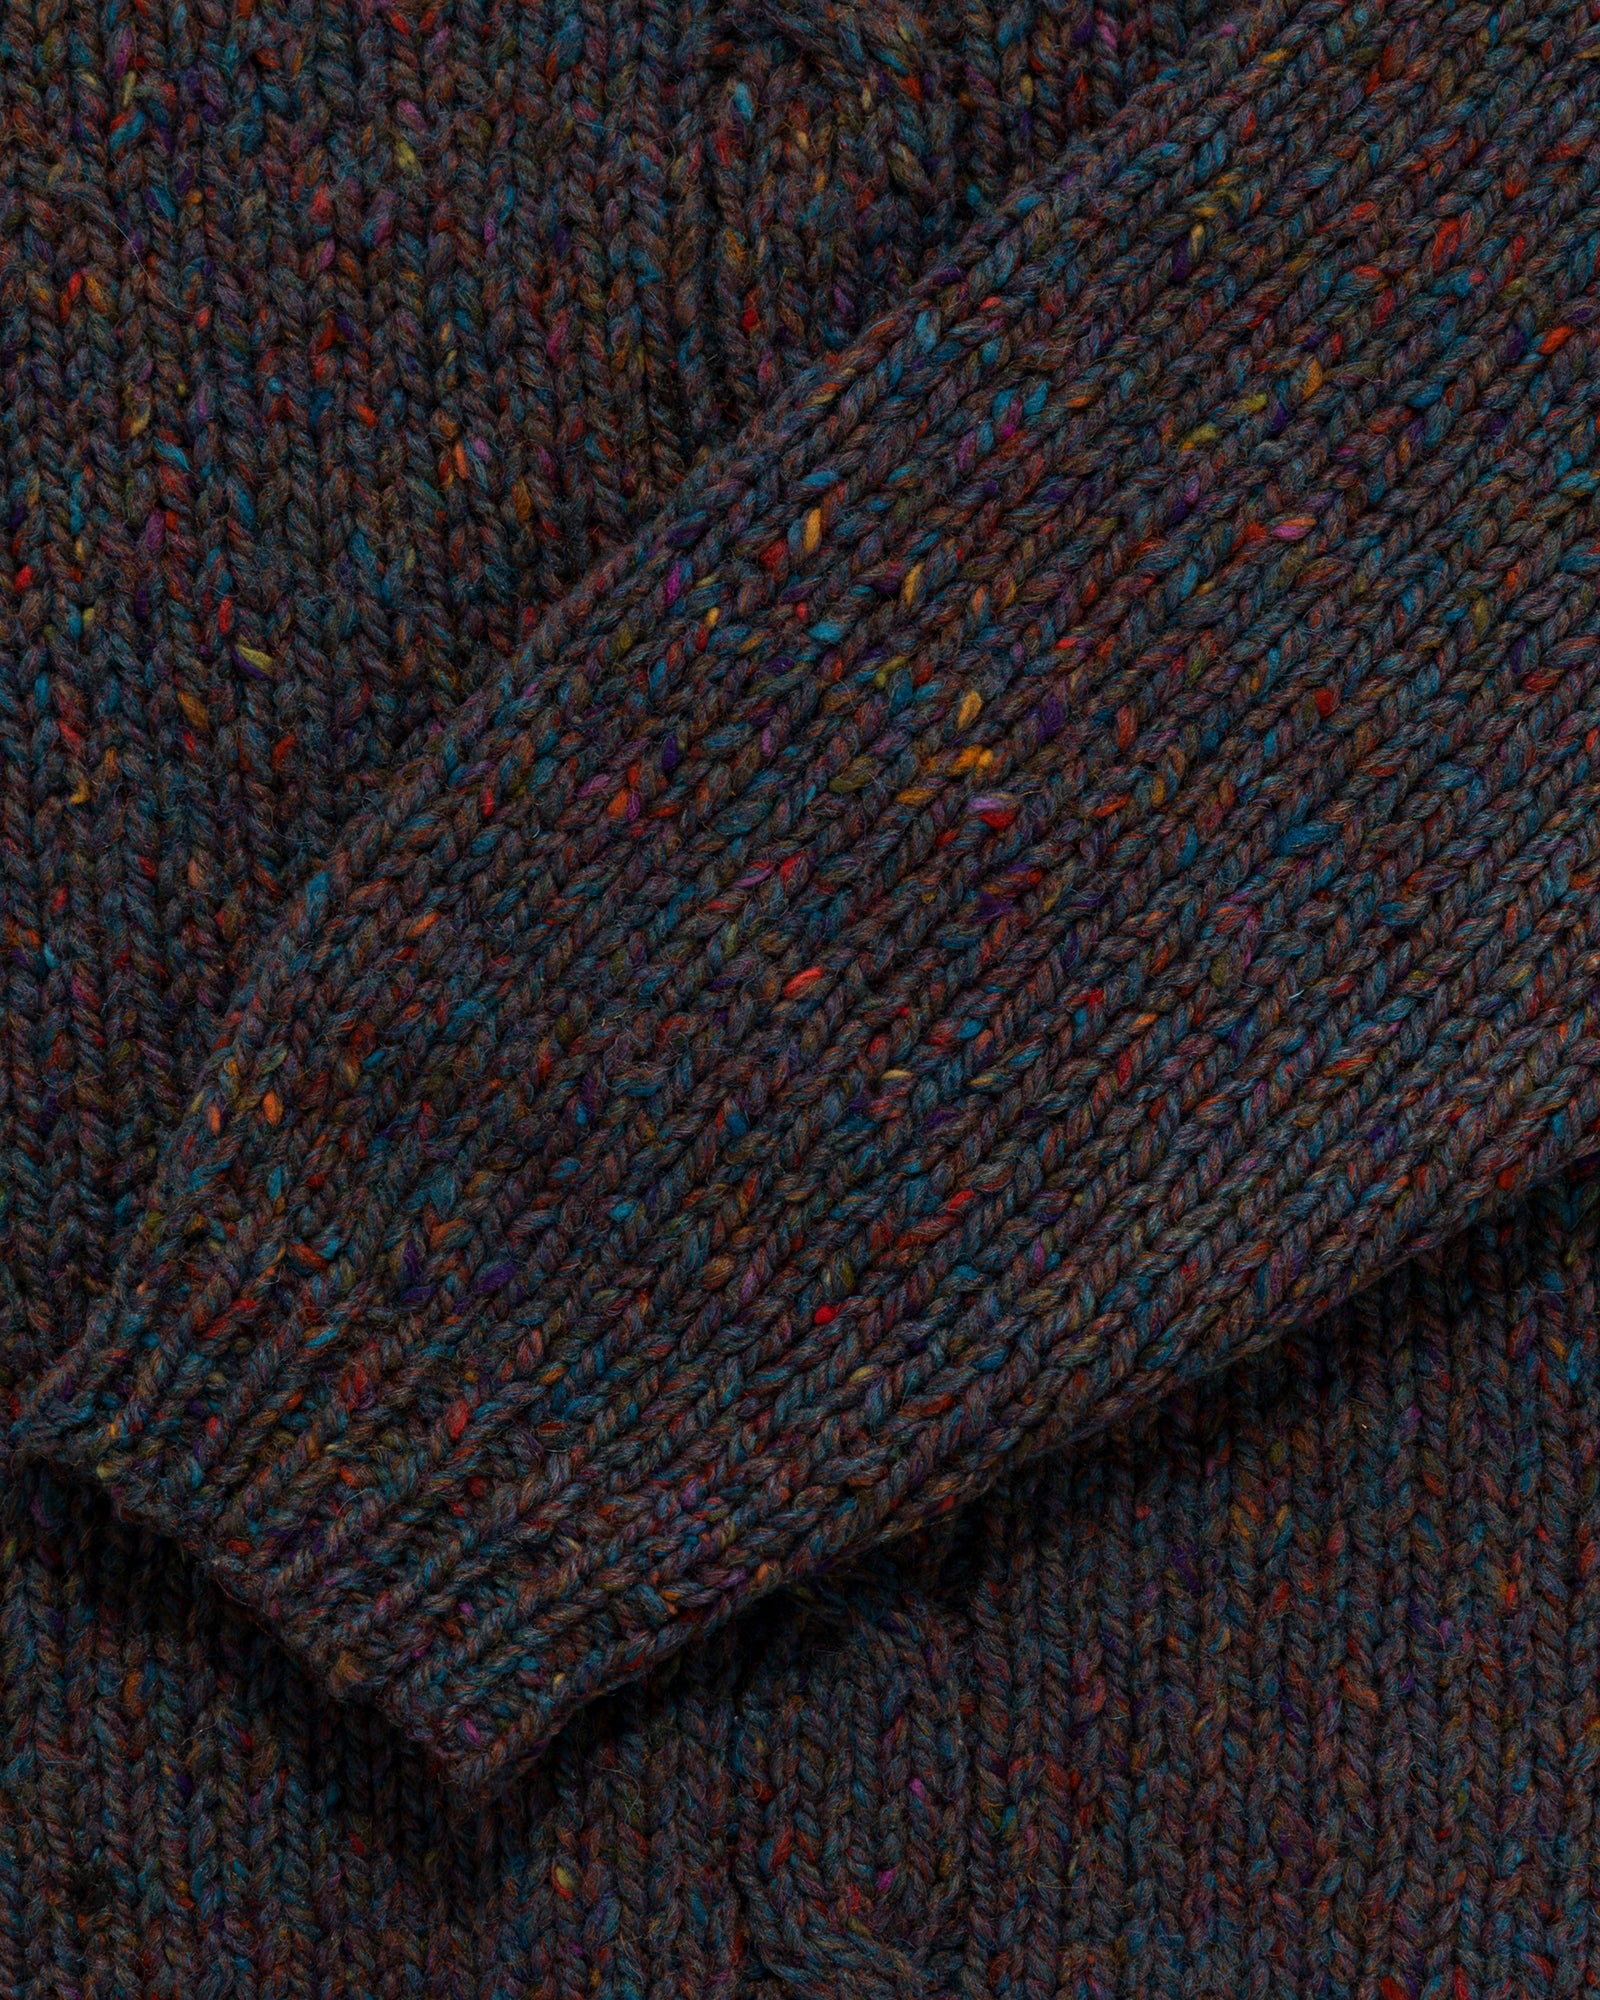 Perry Ellis Hand Knit Multi Color Wool Sweater